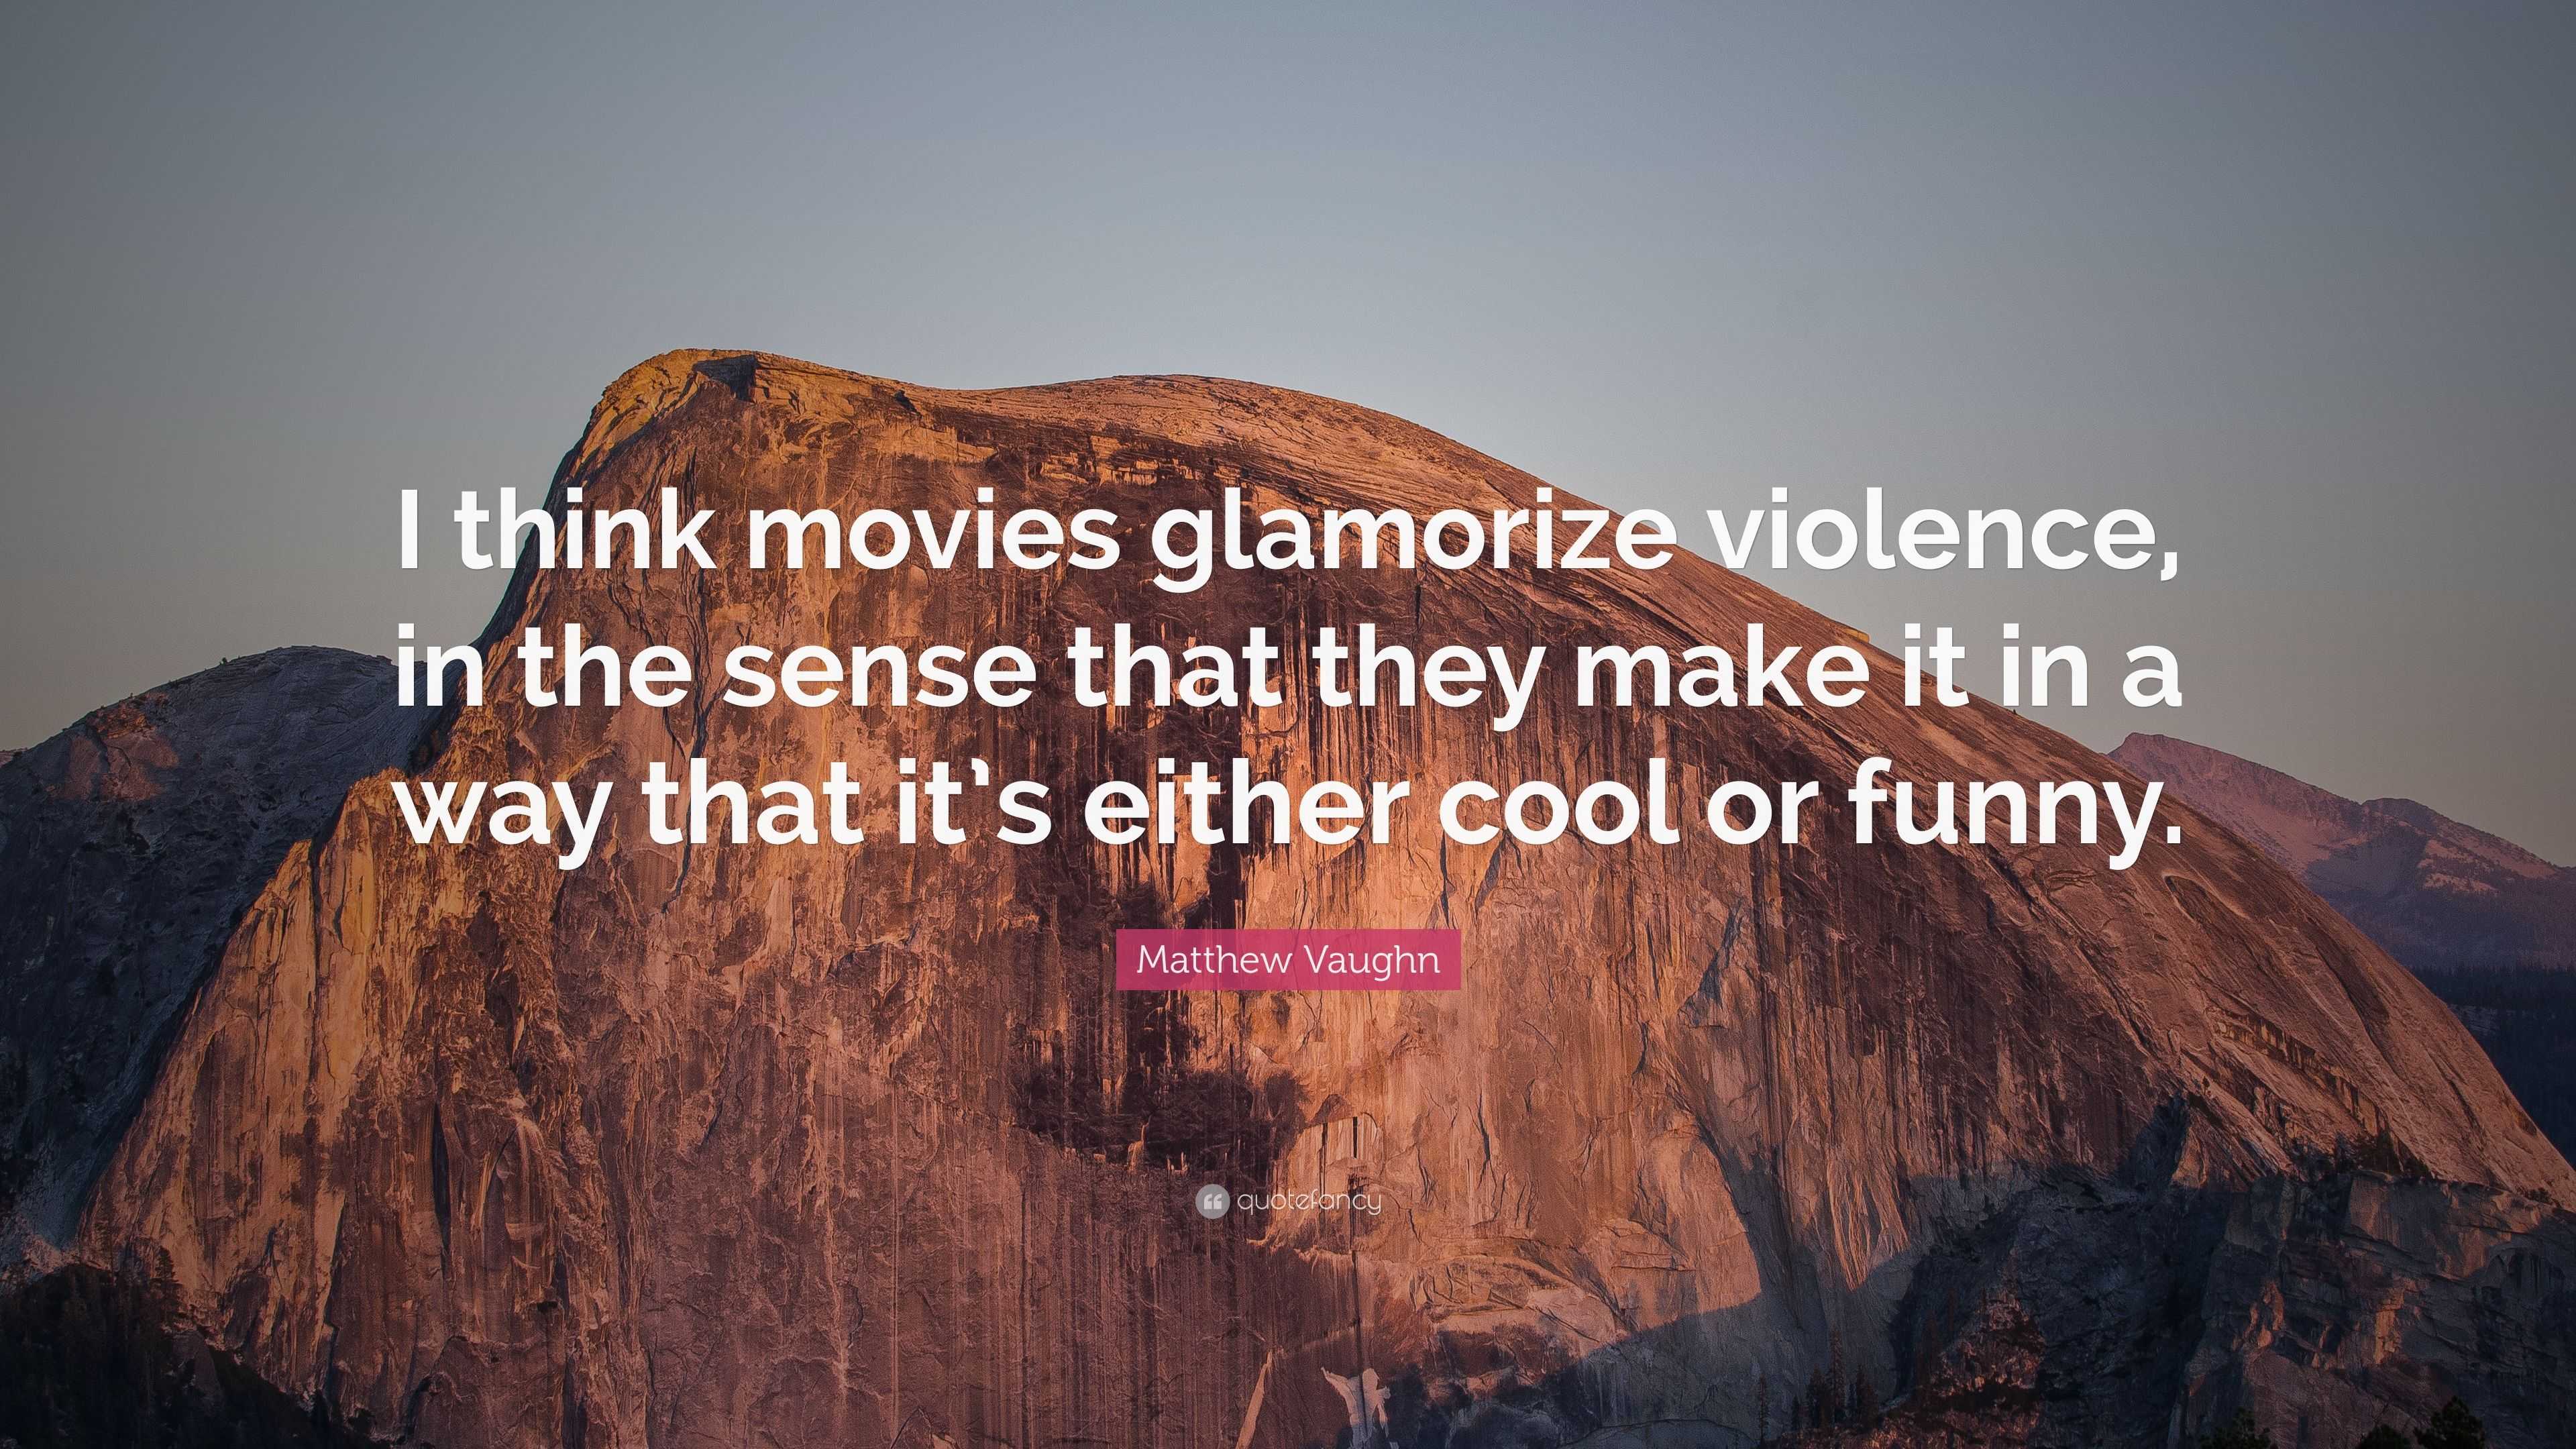 Matthew Vaughn Quote: “I think movies glamorize violence, in the